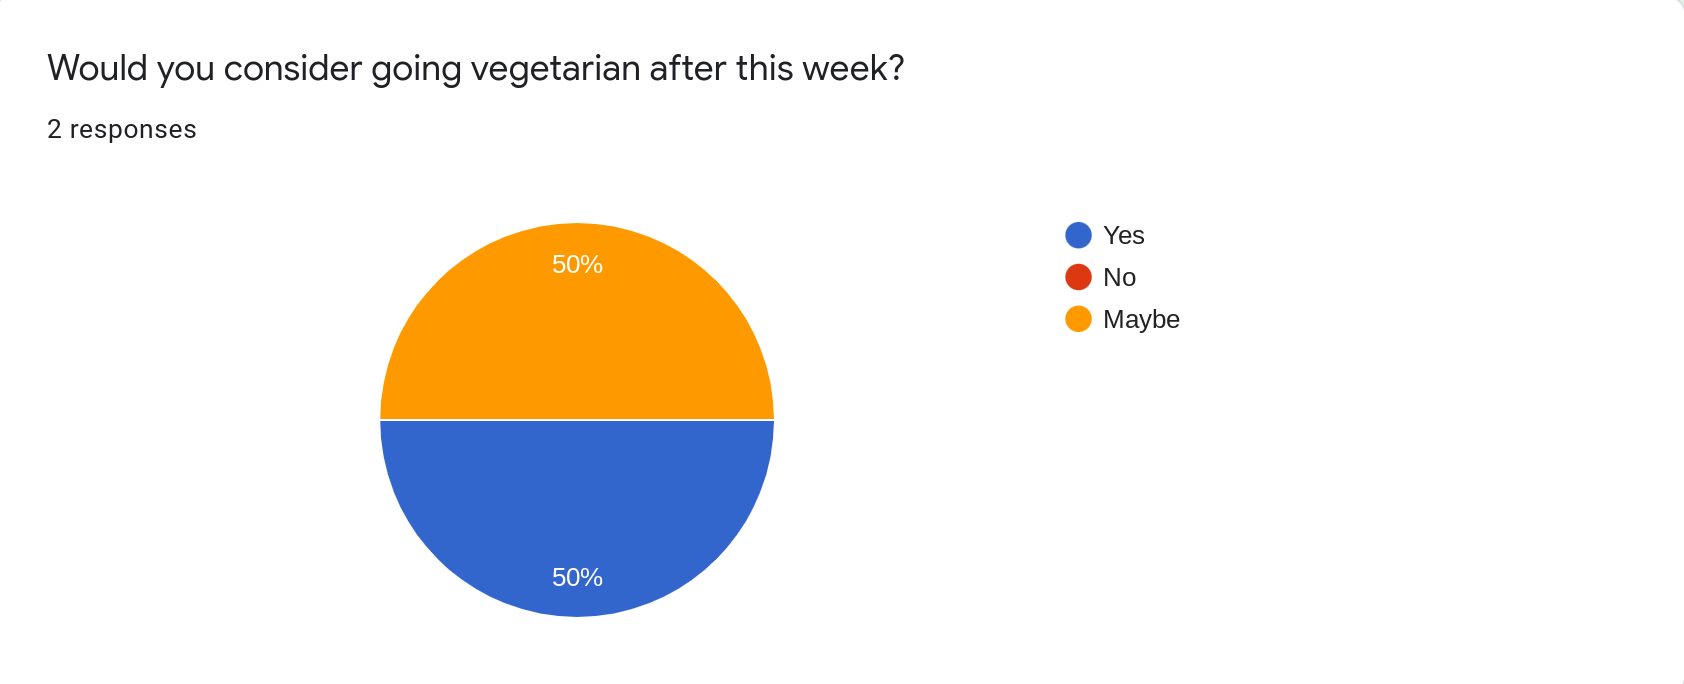 The majority of participants would consider or maybe consider going vegetarian after the challenge